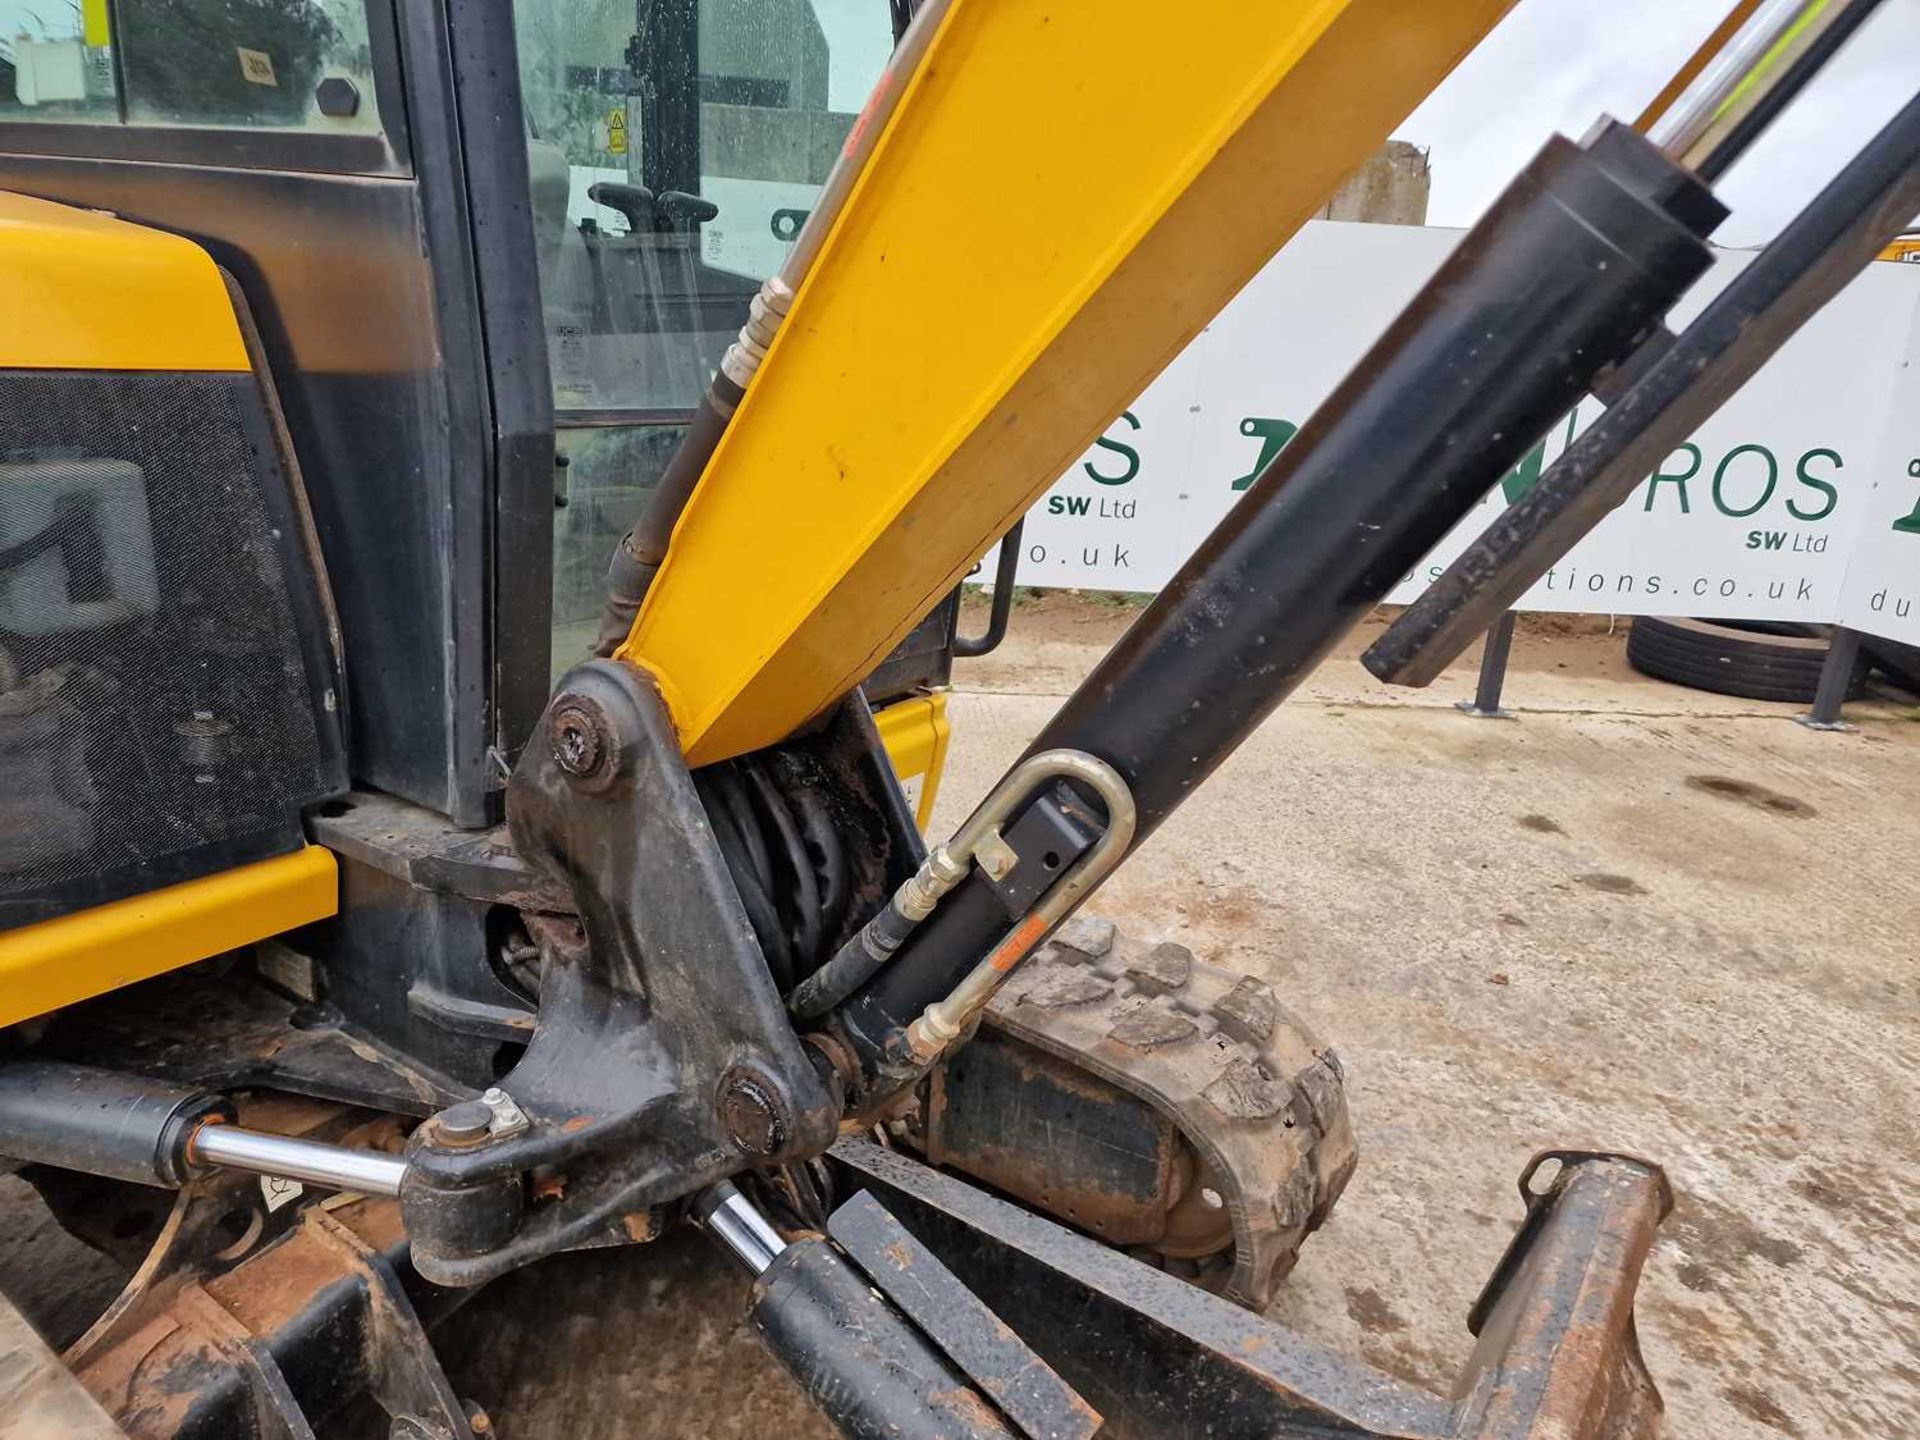 2017 JCB 57C-1 Rubber Tracks, Blade, Offset, JCB Hydraulic QH, Piped, 72", 30", 18" Bucket - Image 13 of 76